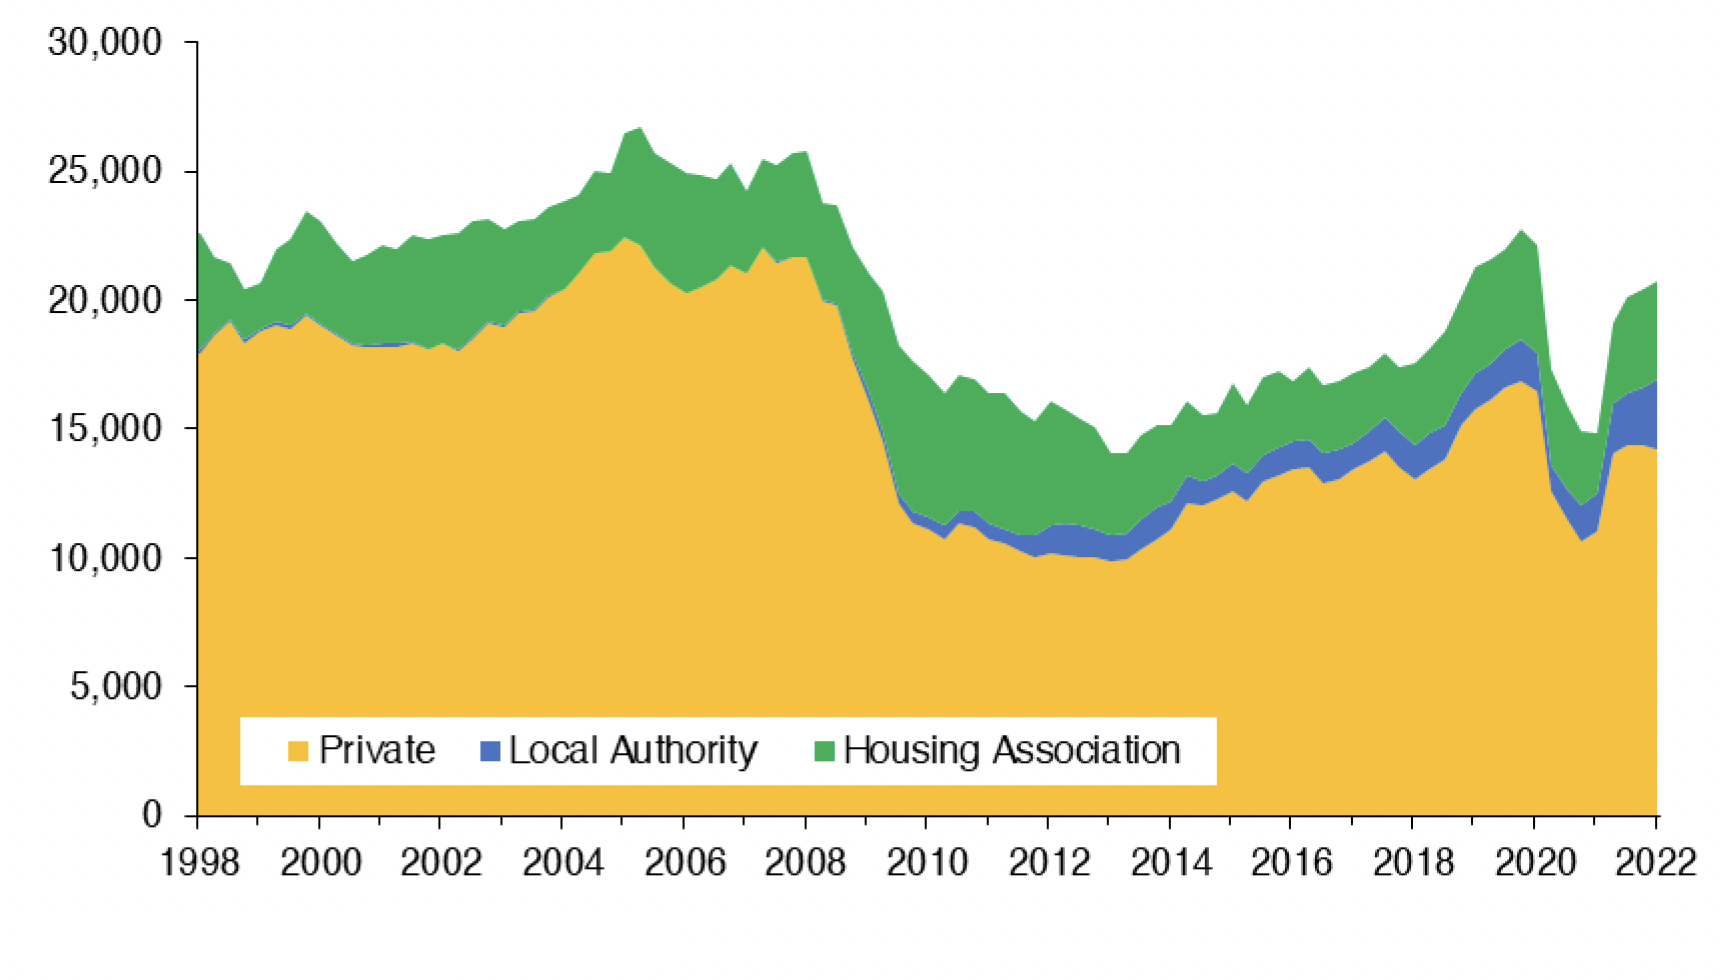 Chart 9.1 shows how the number of new build completions in Scotland have progressed since Q1 1998 to Q1 2022. The data is split by sector, namely private-sector, local authority and housing association new build completions. 